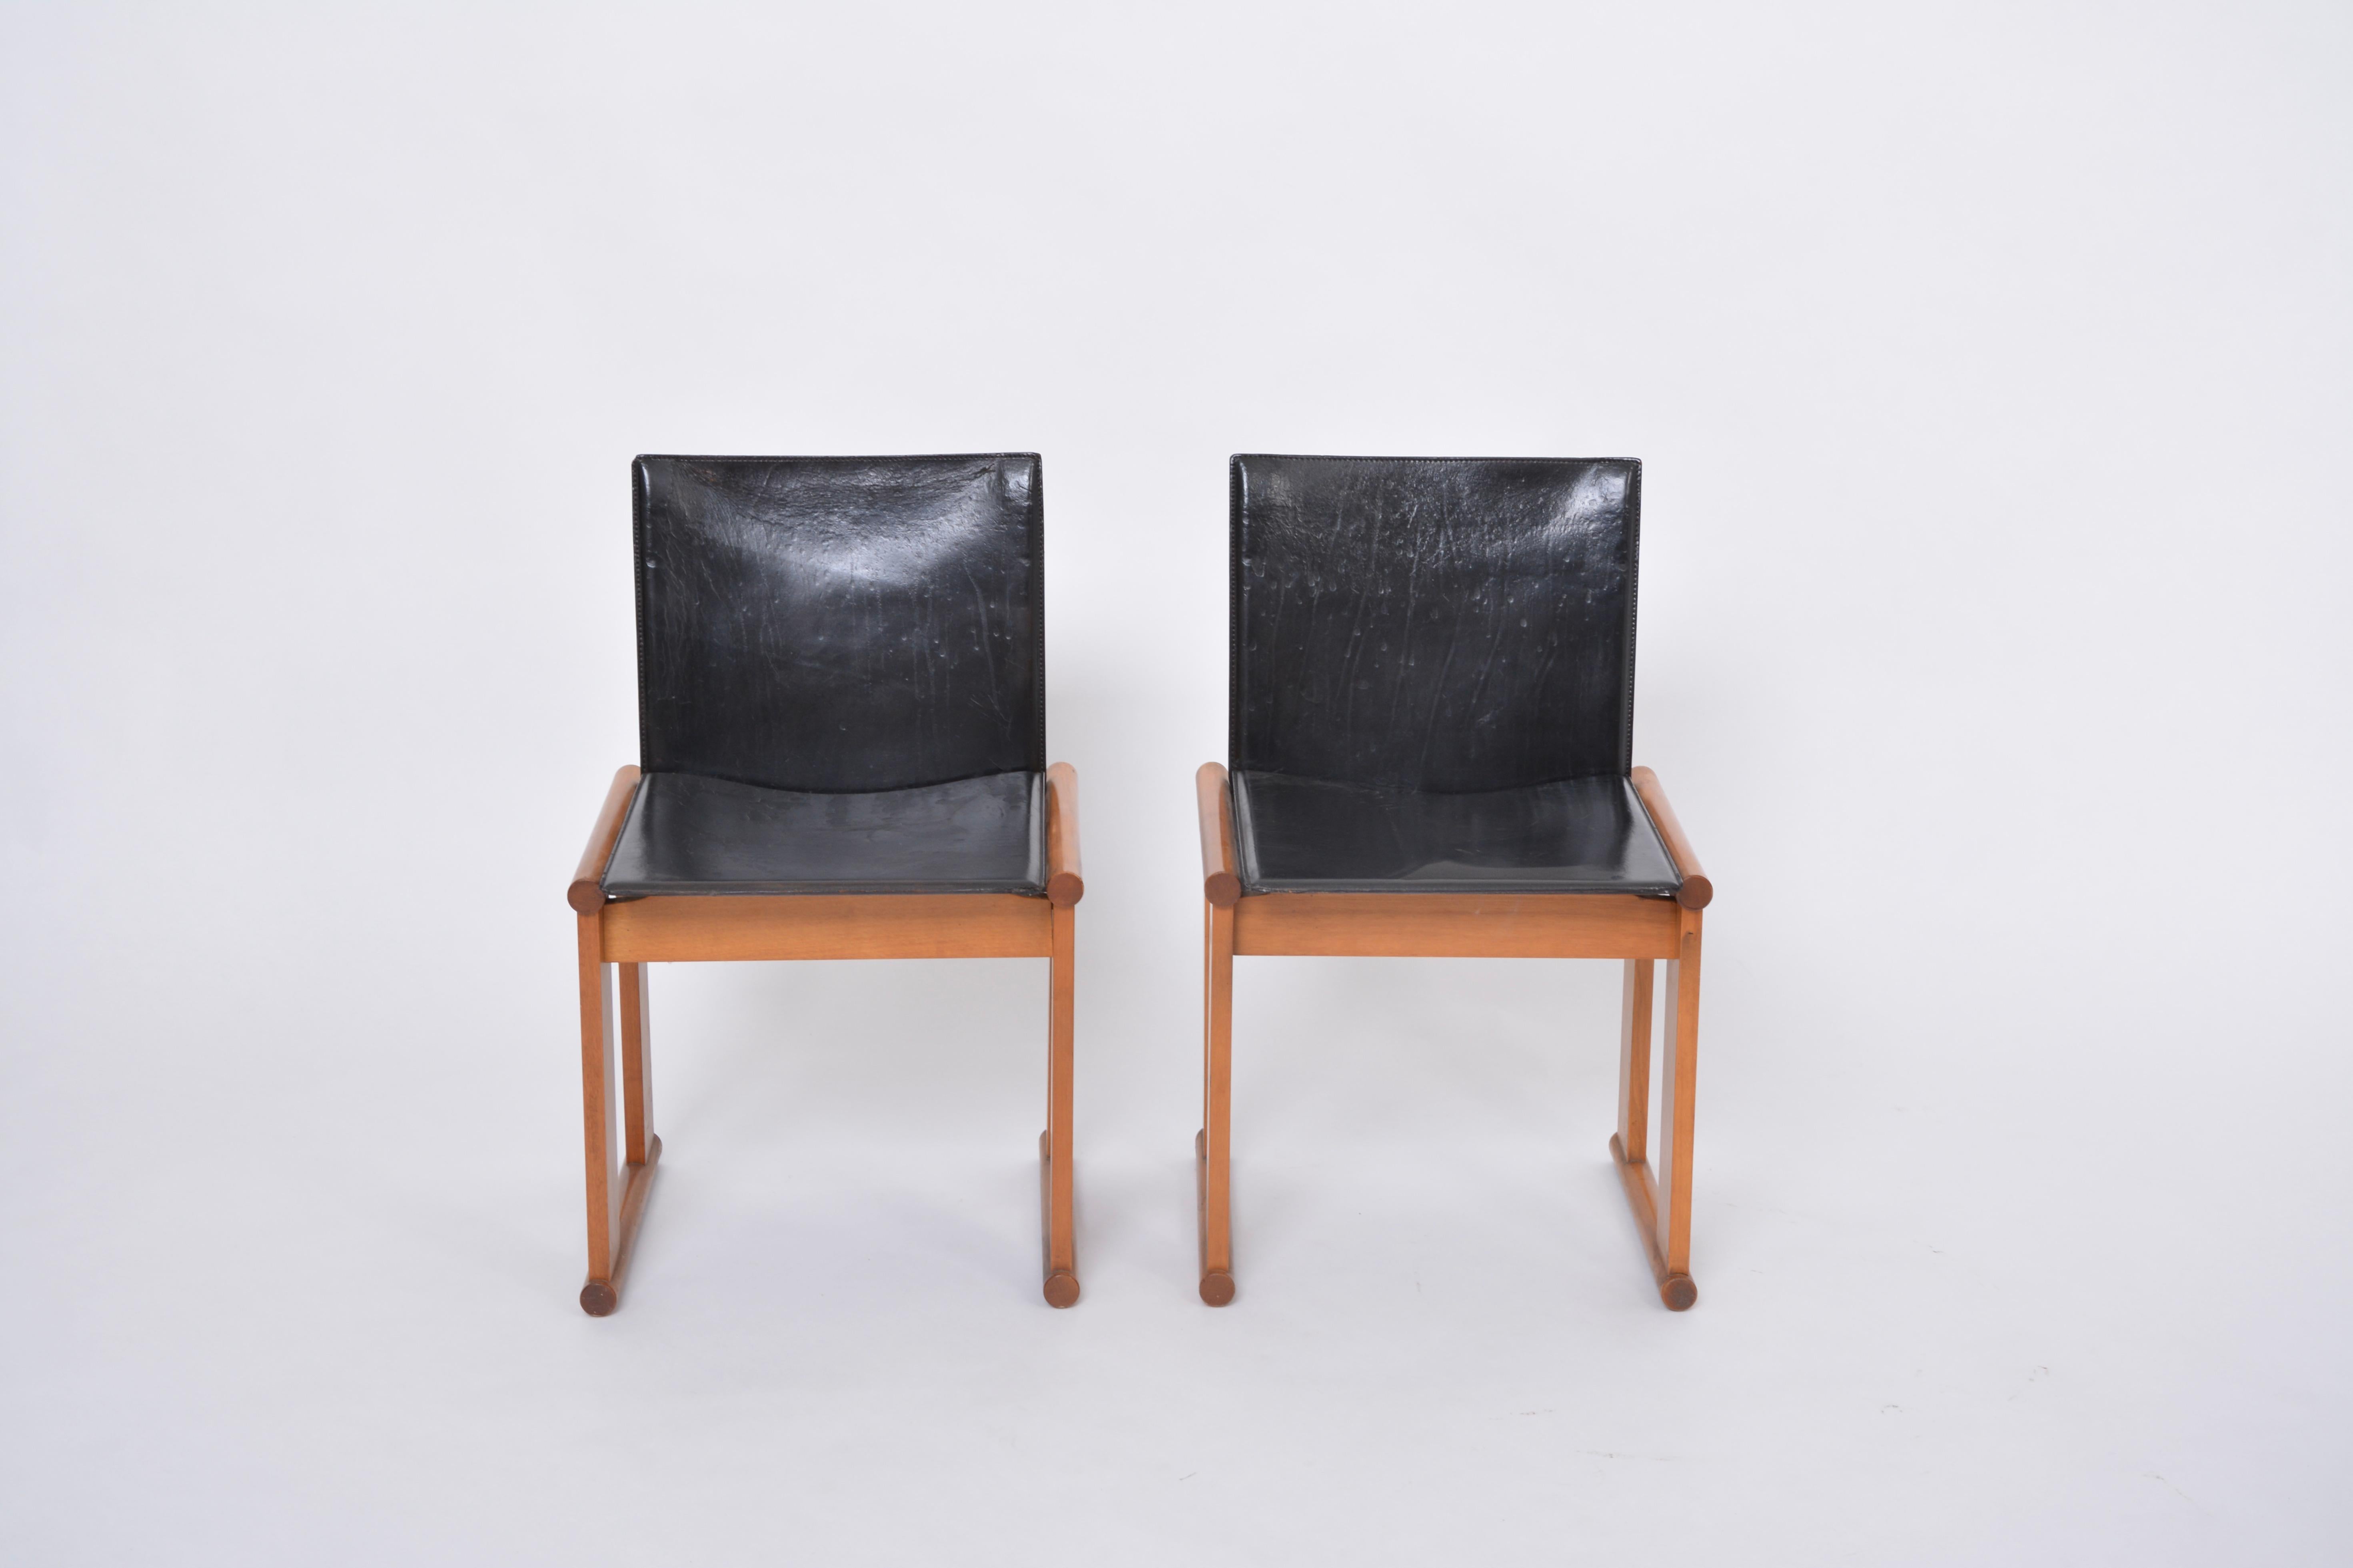 Afra & Tobia Scarpa attributed Pair of Dining Chairs in Black Leather
This pair of dining chairs shows strong resemblance to two designs of famous Italian designers Afra & Tobia Scarpa: the 'Monk' chairs (1974) and the 'Dialogo' chairs (1970s) who